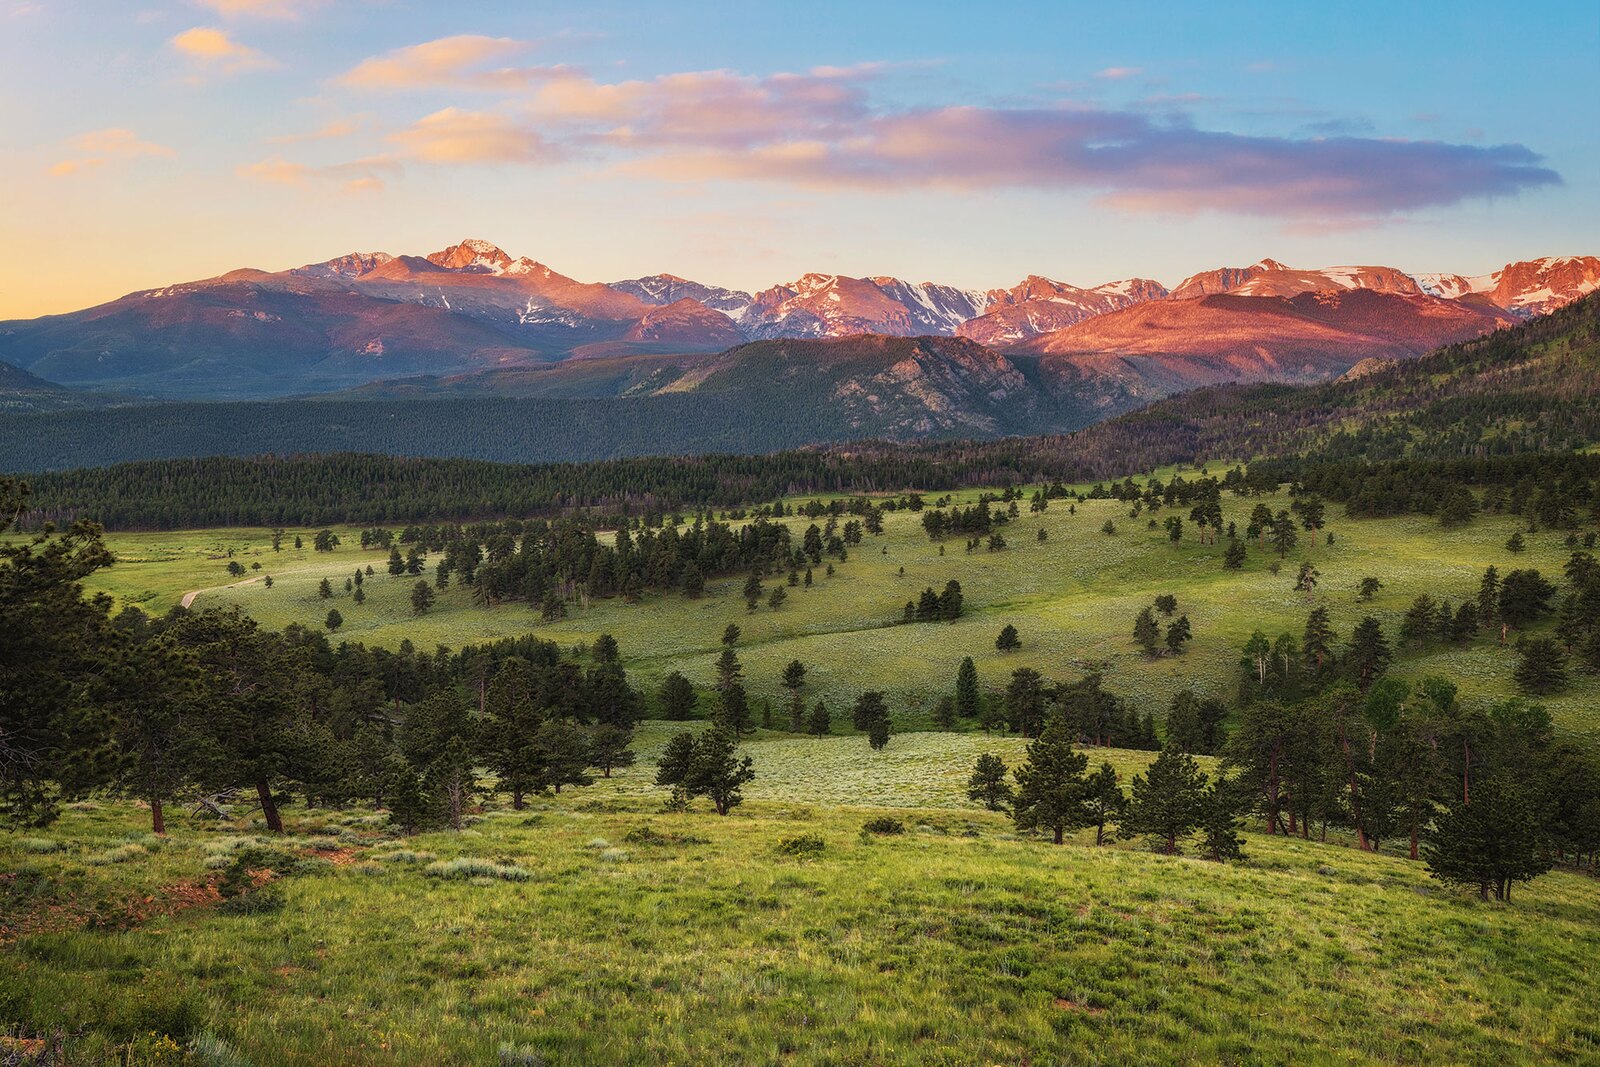 Image of TR - Upper Beaver Meadows by Ryan Smith